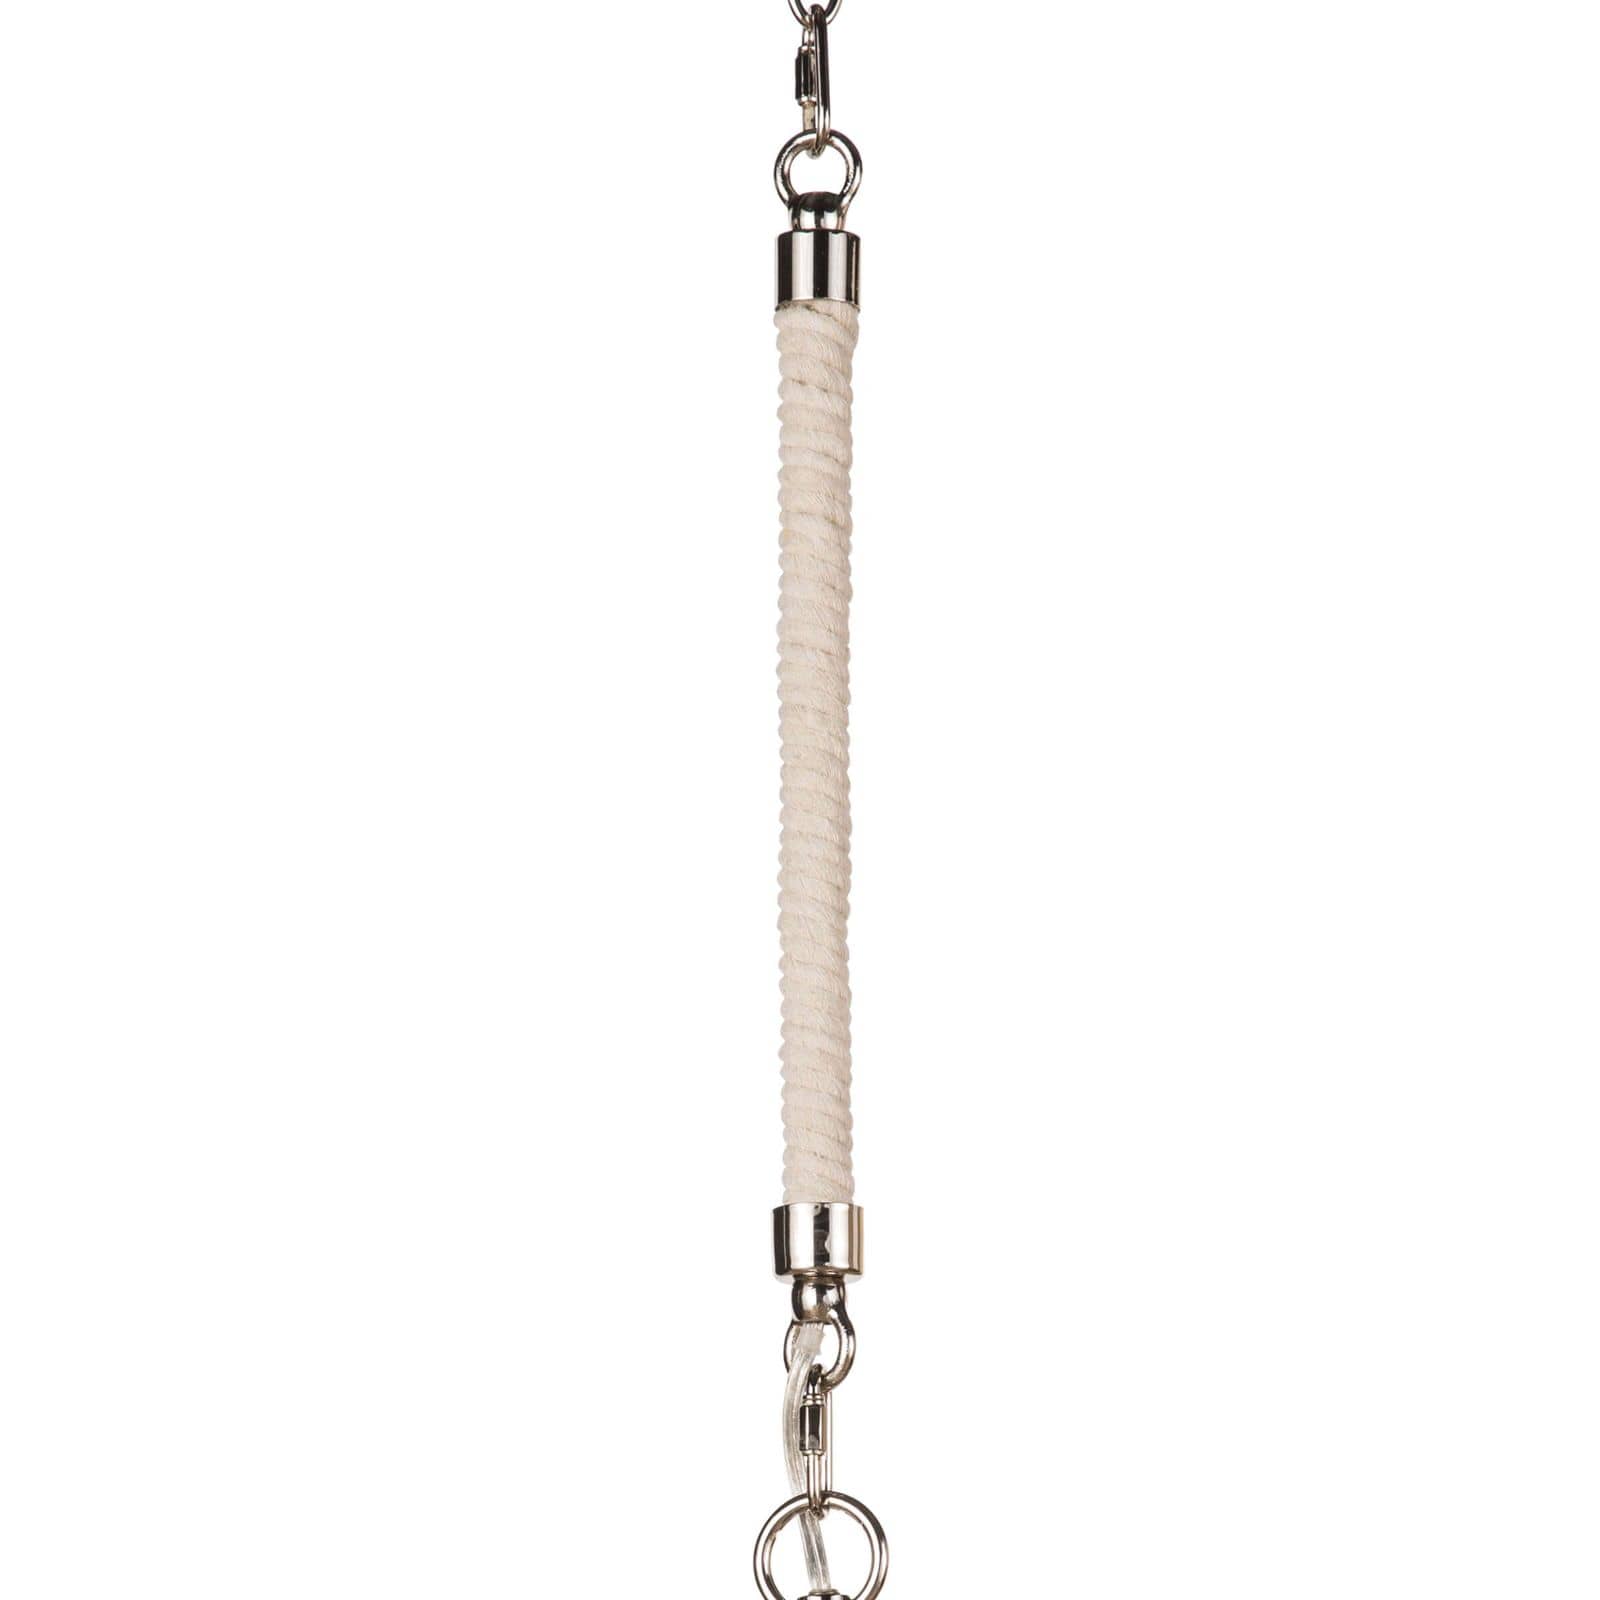 Dover Pendant in Polished Nickel by Coastal Living